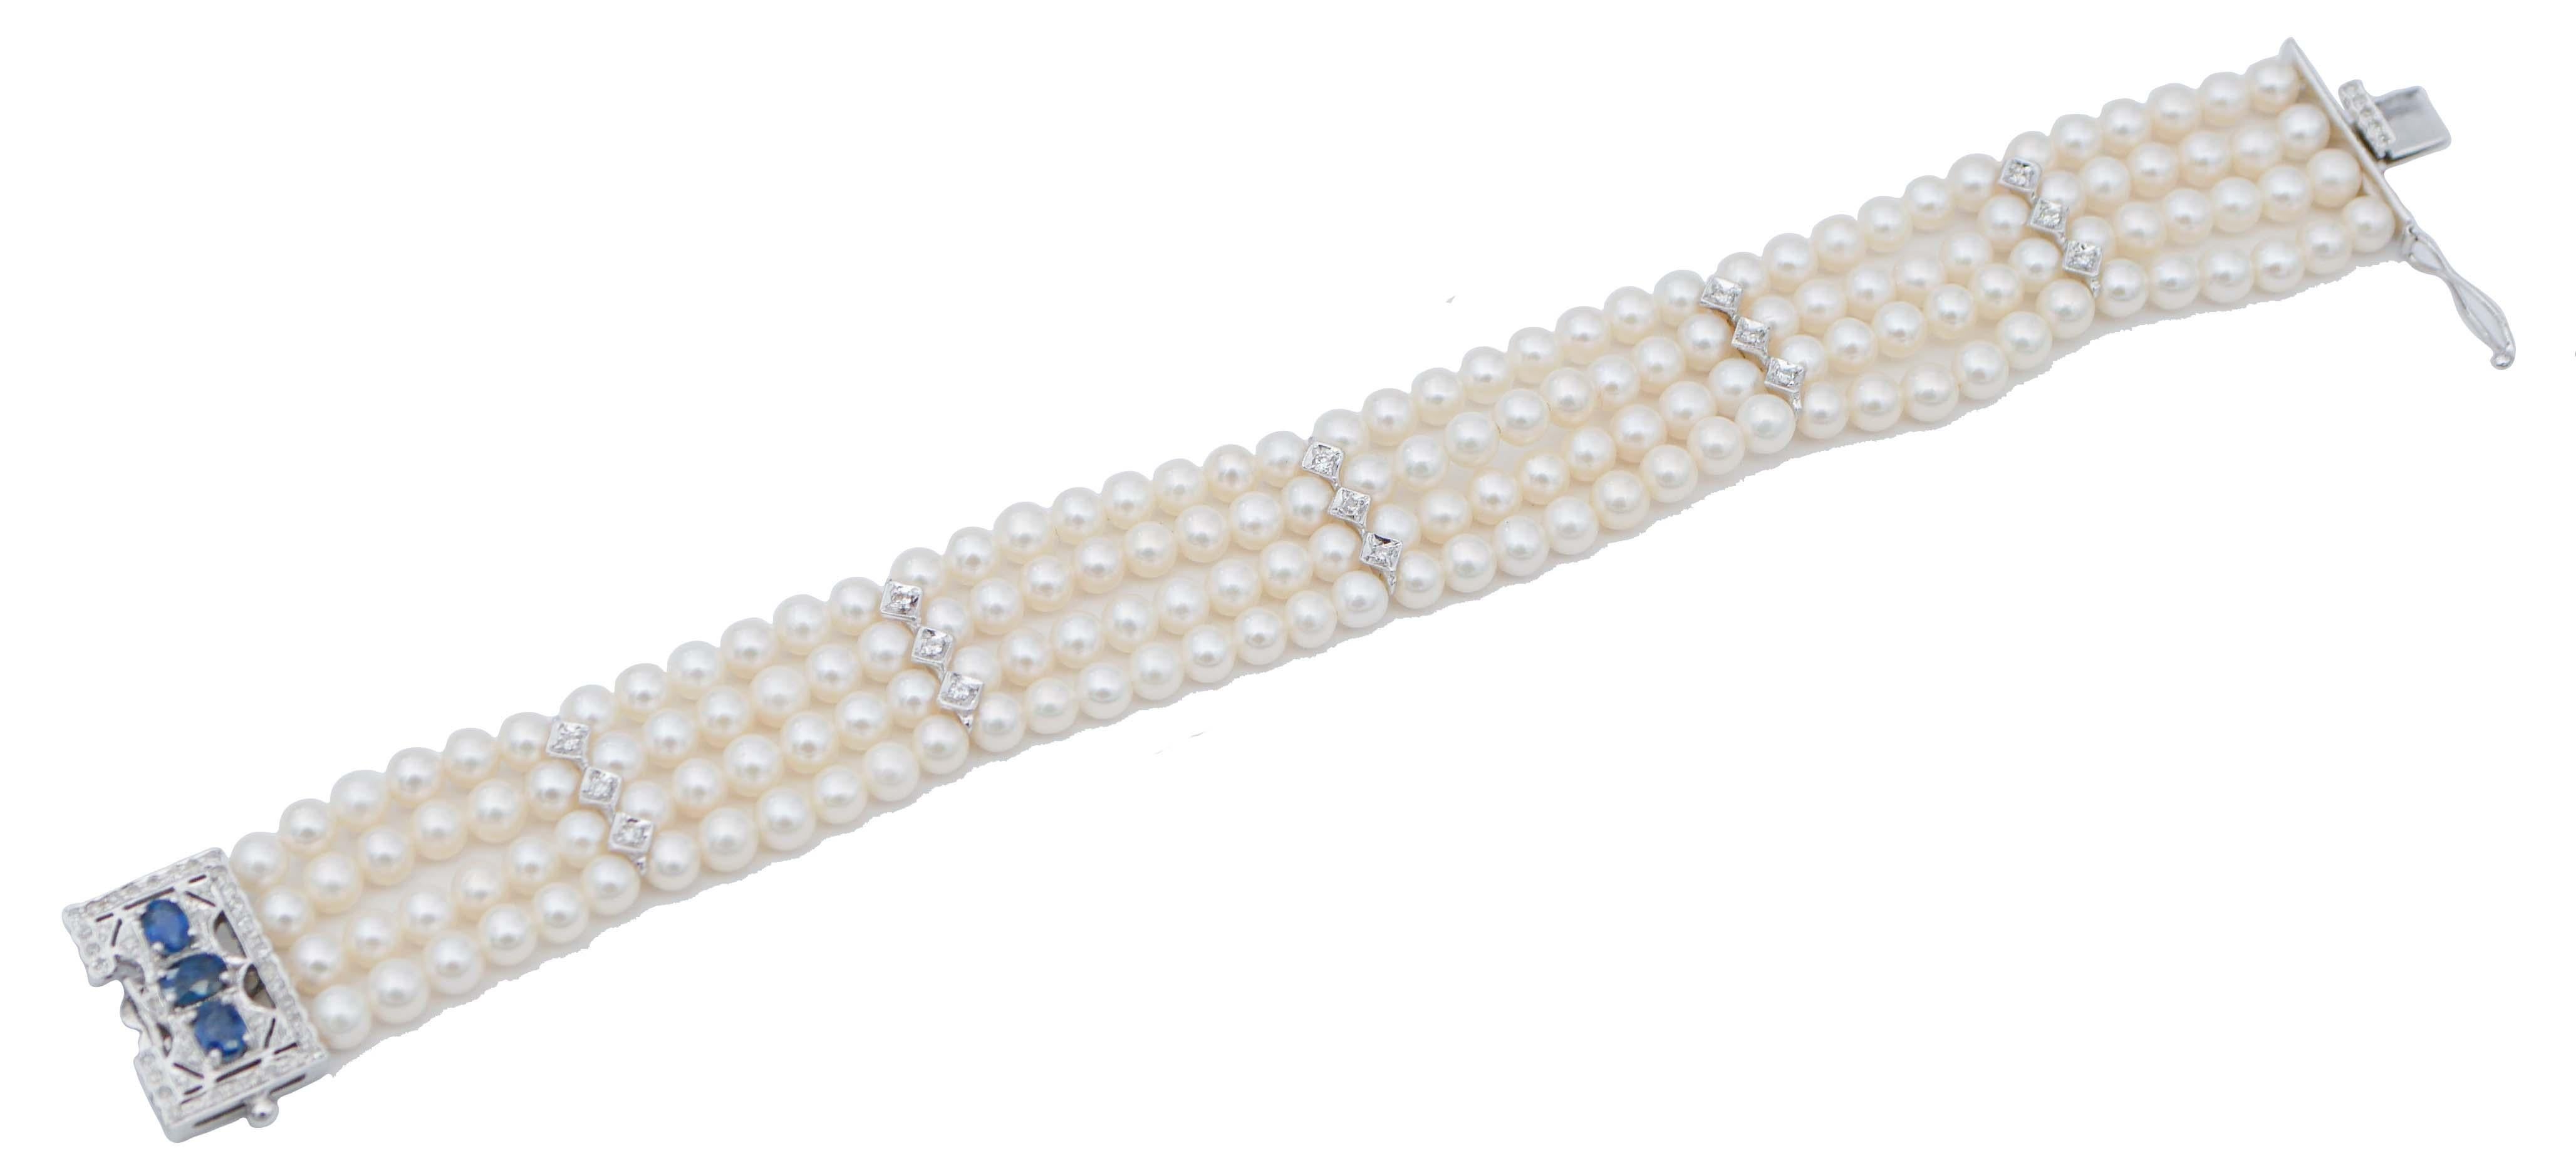 SHIPPING POLICY: 
No additional costs will be added to this order. 
Shipping costs will be totally covered by the seller (customs duties included).

Amazing beaded retrò bracelet composed of 4 strands of pearls and a clasp in 14 kt white gold